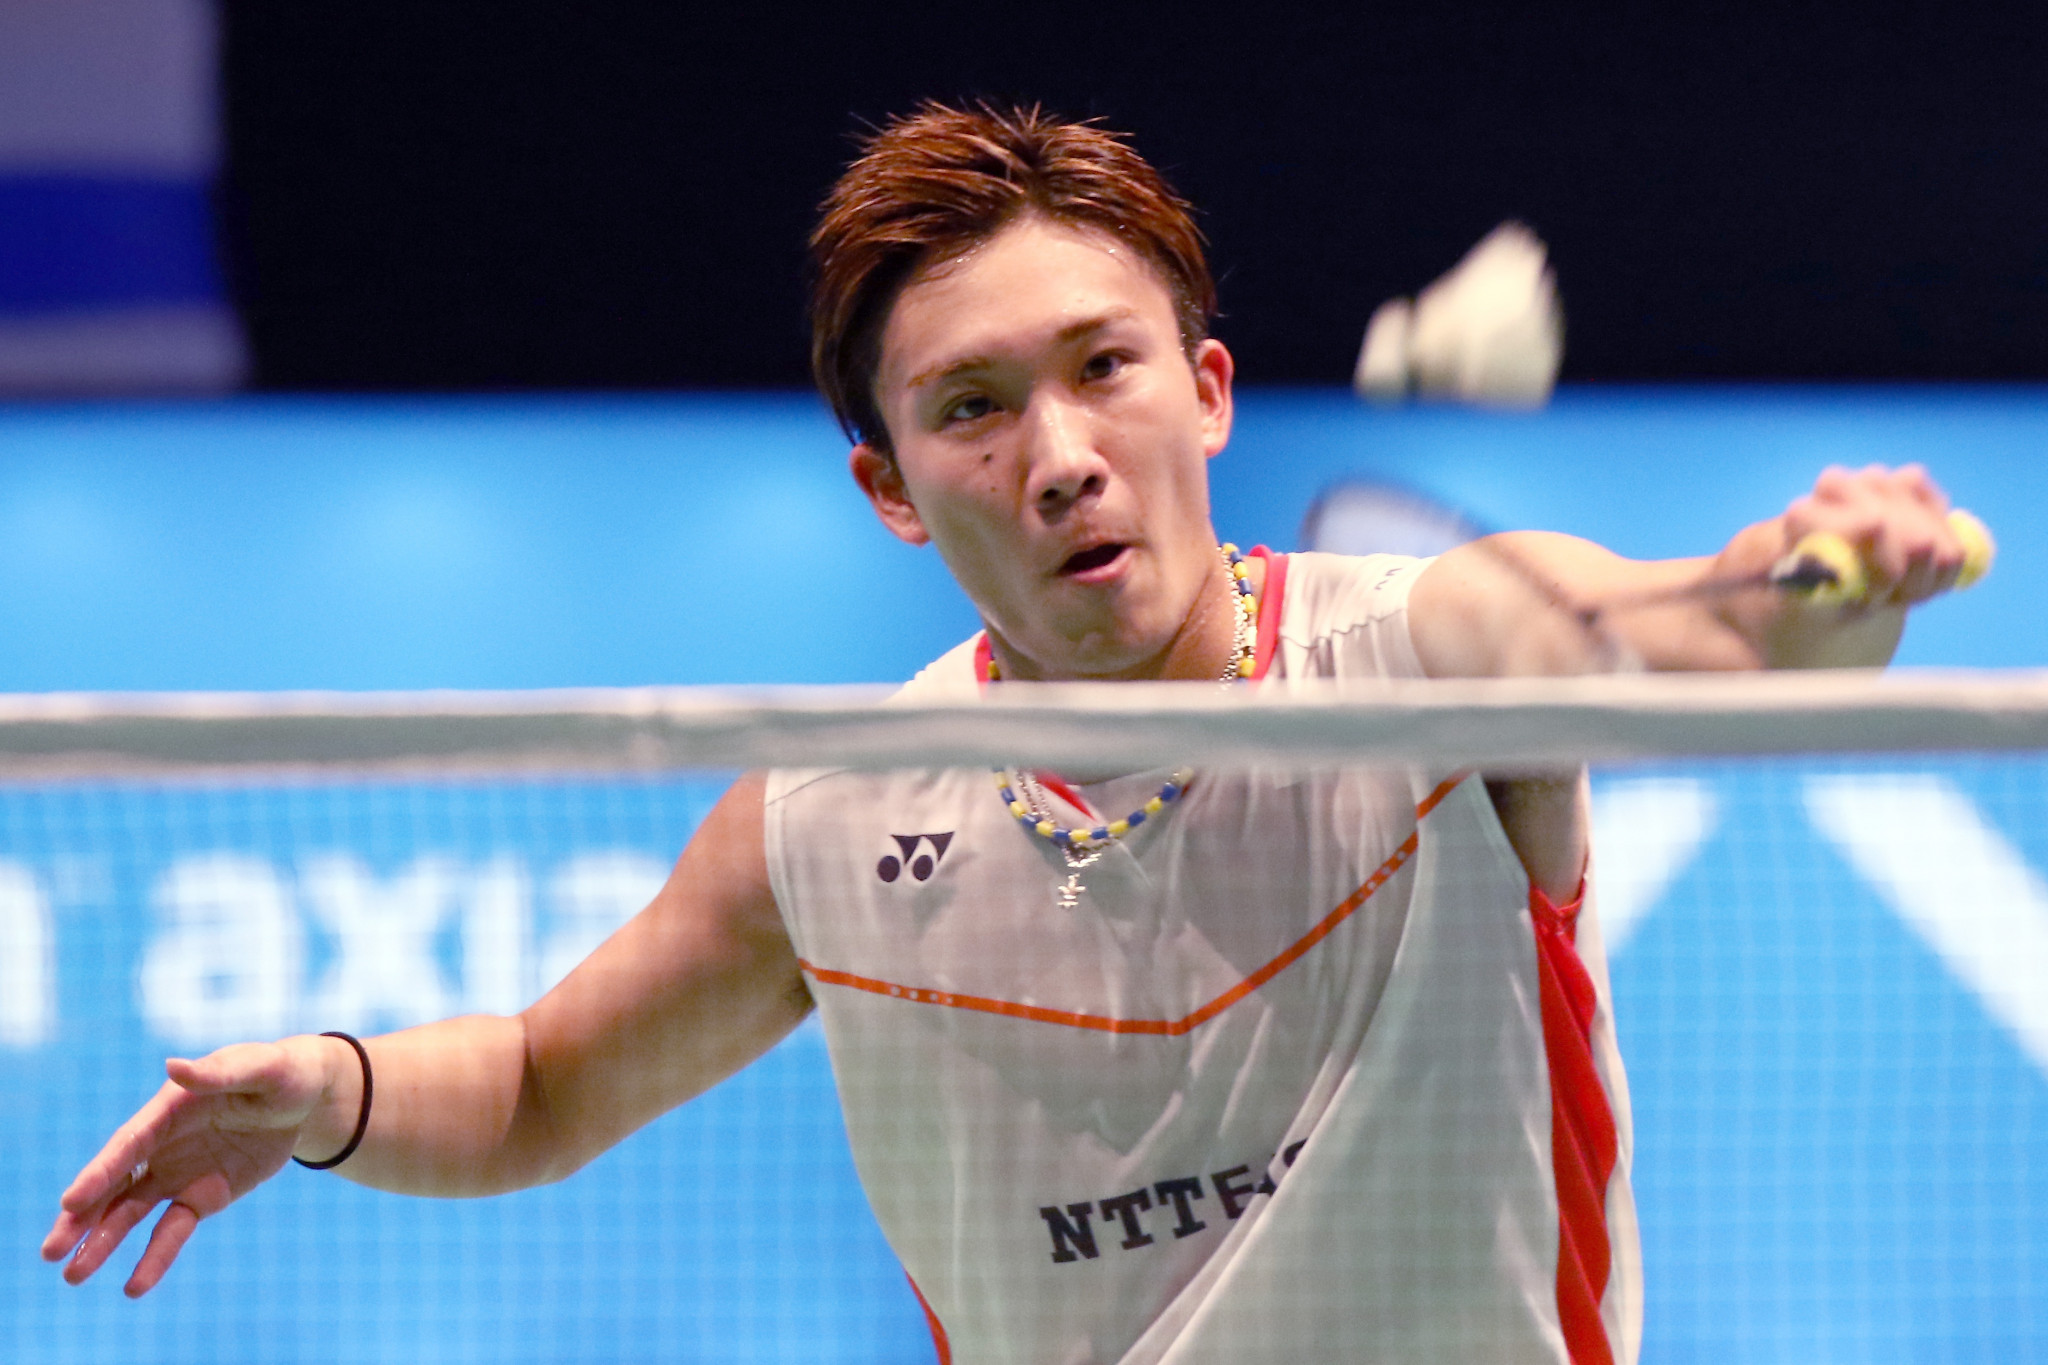 Kento Momota eased to victory in the men's singles final ©Getty Images